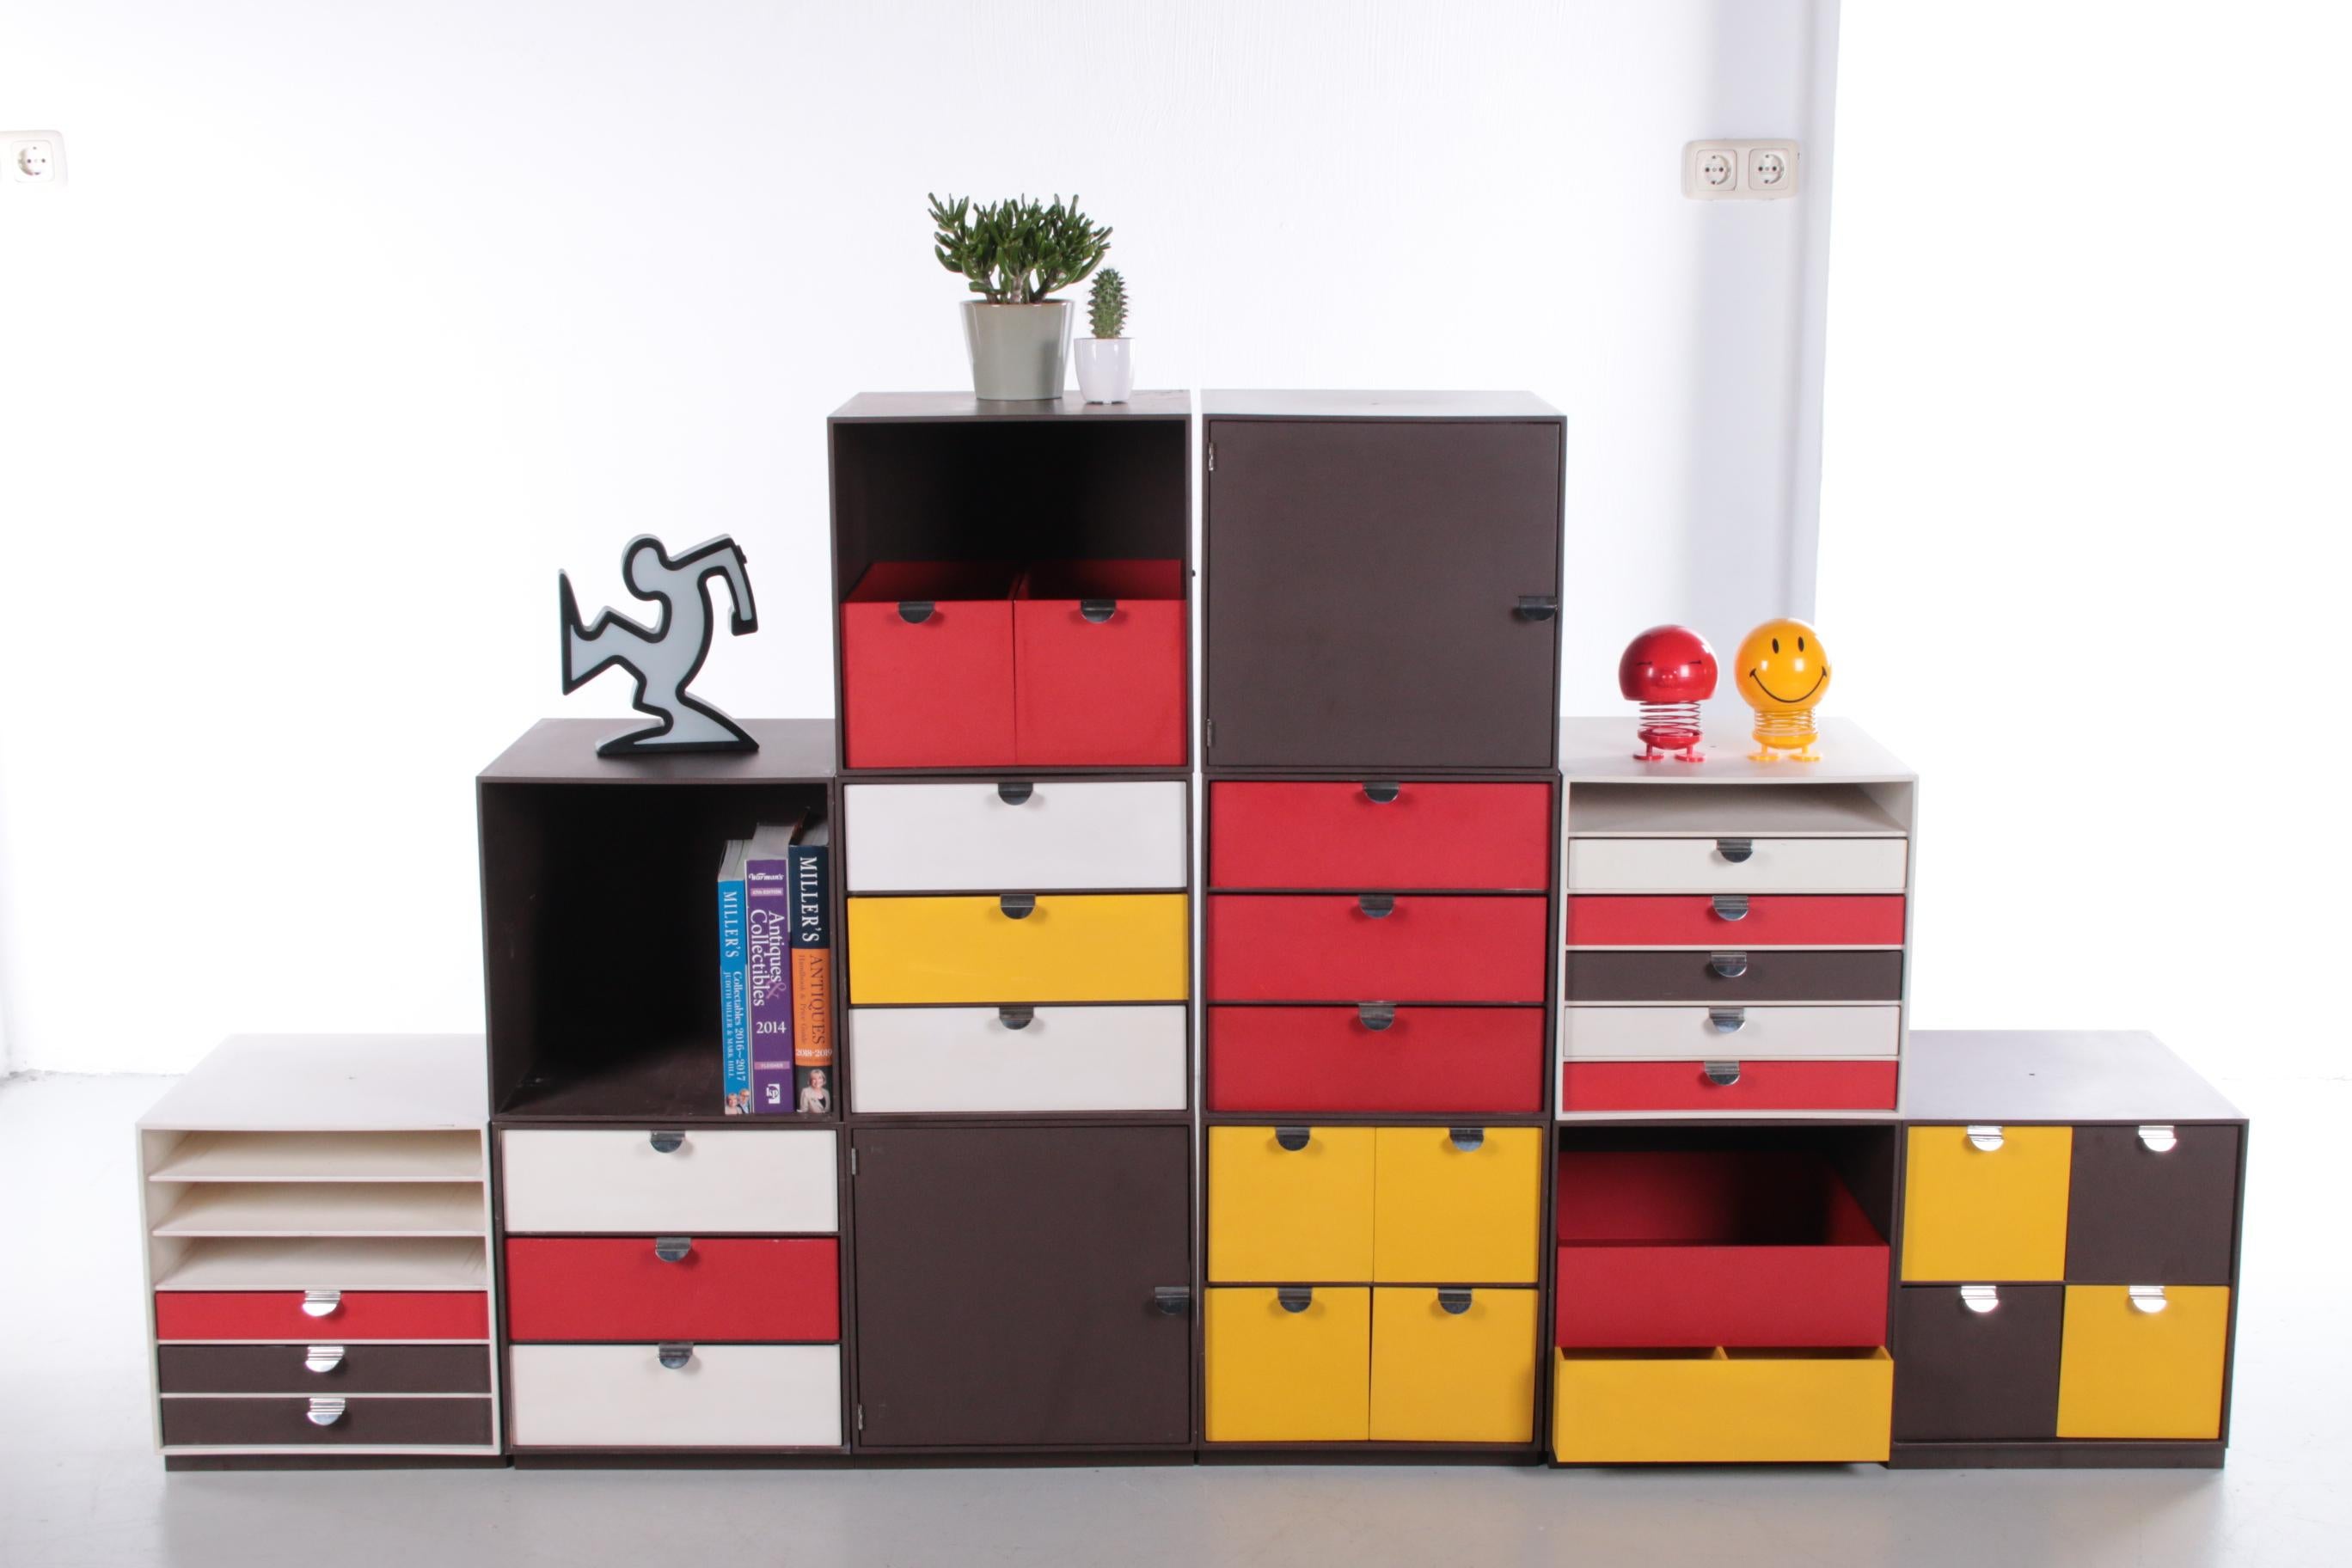 alaset Palanox boxes

storage boxes with multi-colored stackable boxes that allow you to build your own shelf, produced only a few years in the early 1970s.

side of one box 35 x 35 x 35 cm 

During his career, the Designer Ristomatti Ratia